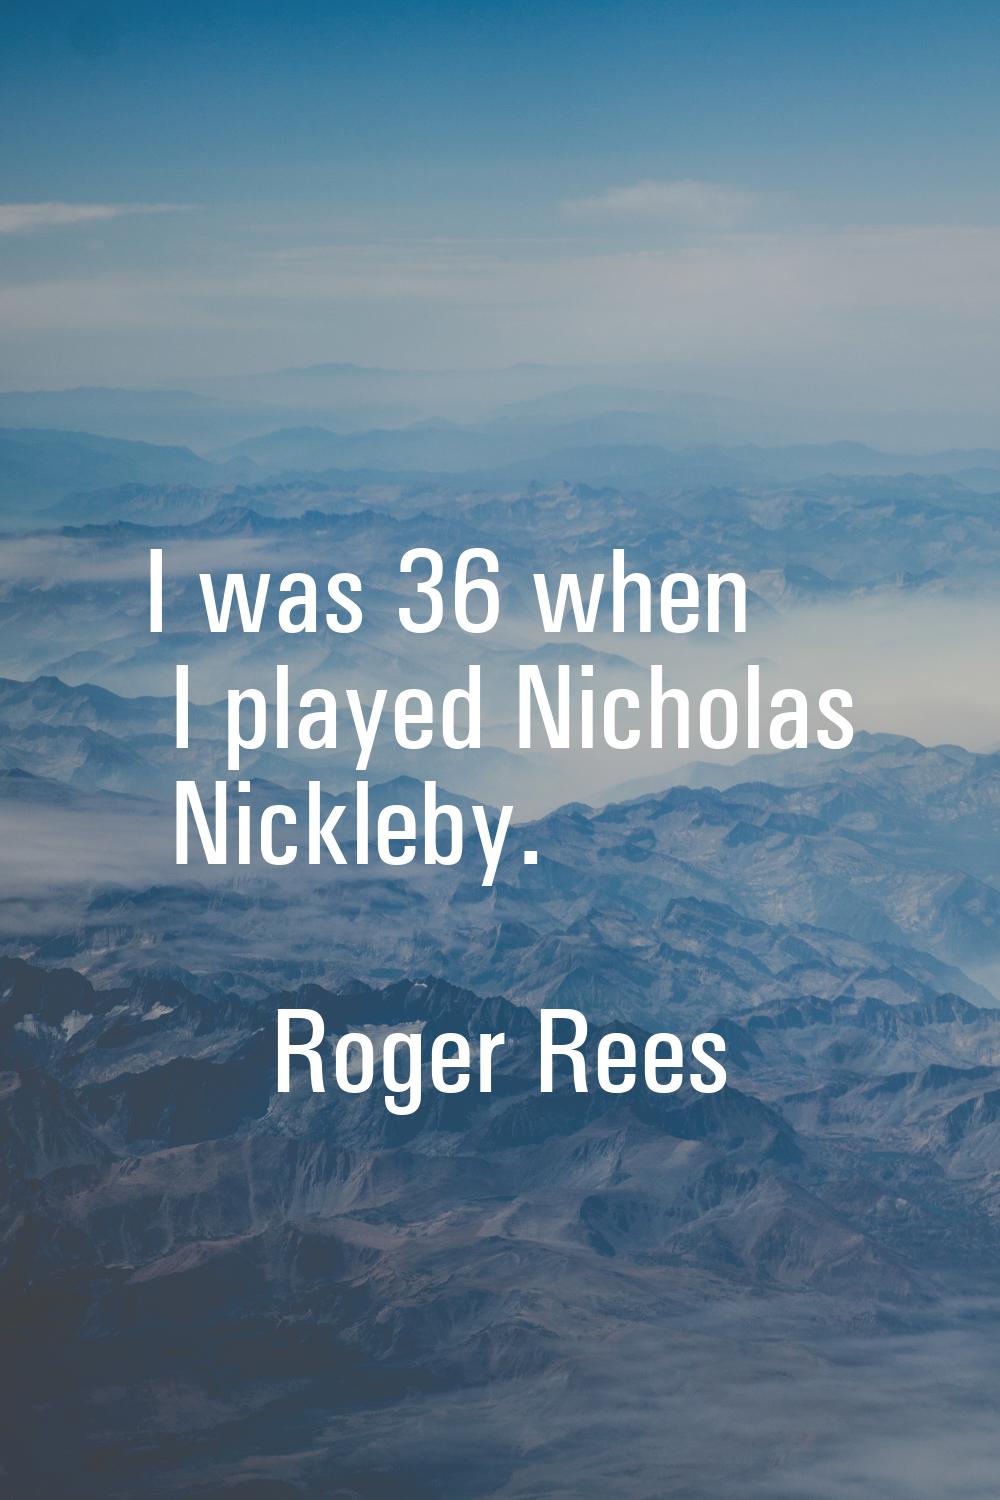 I was 36 when I played Nicholas Nickleby.